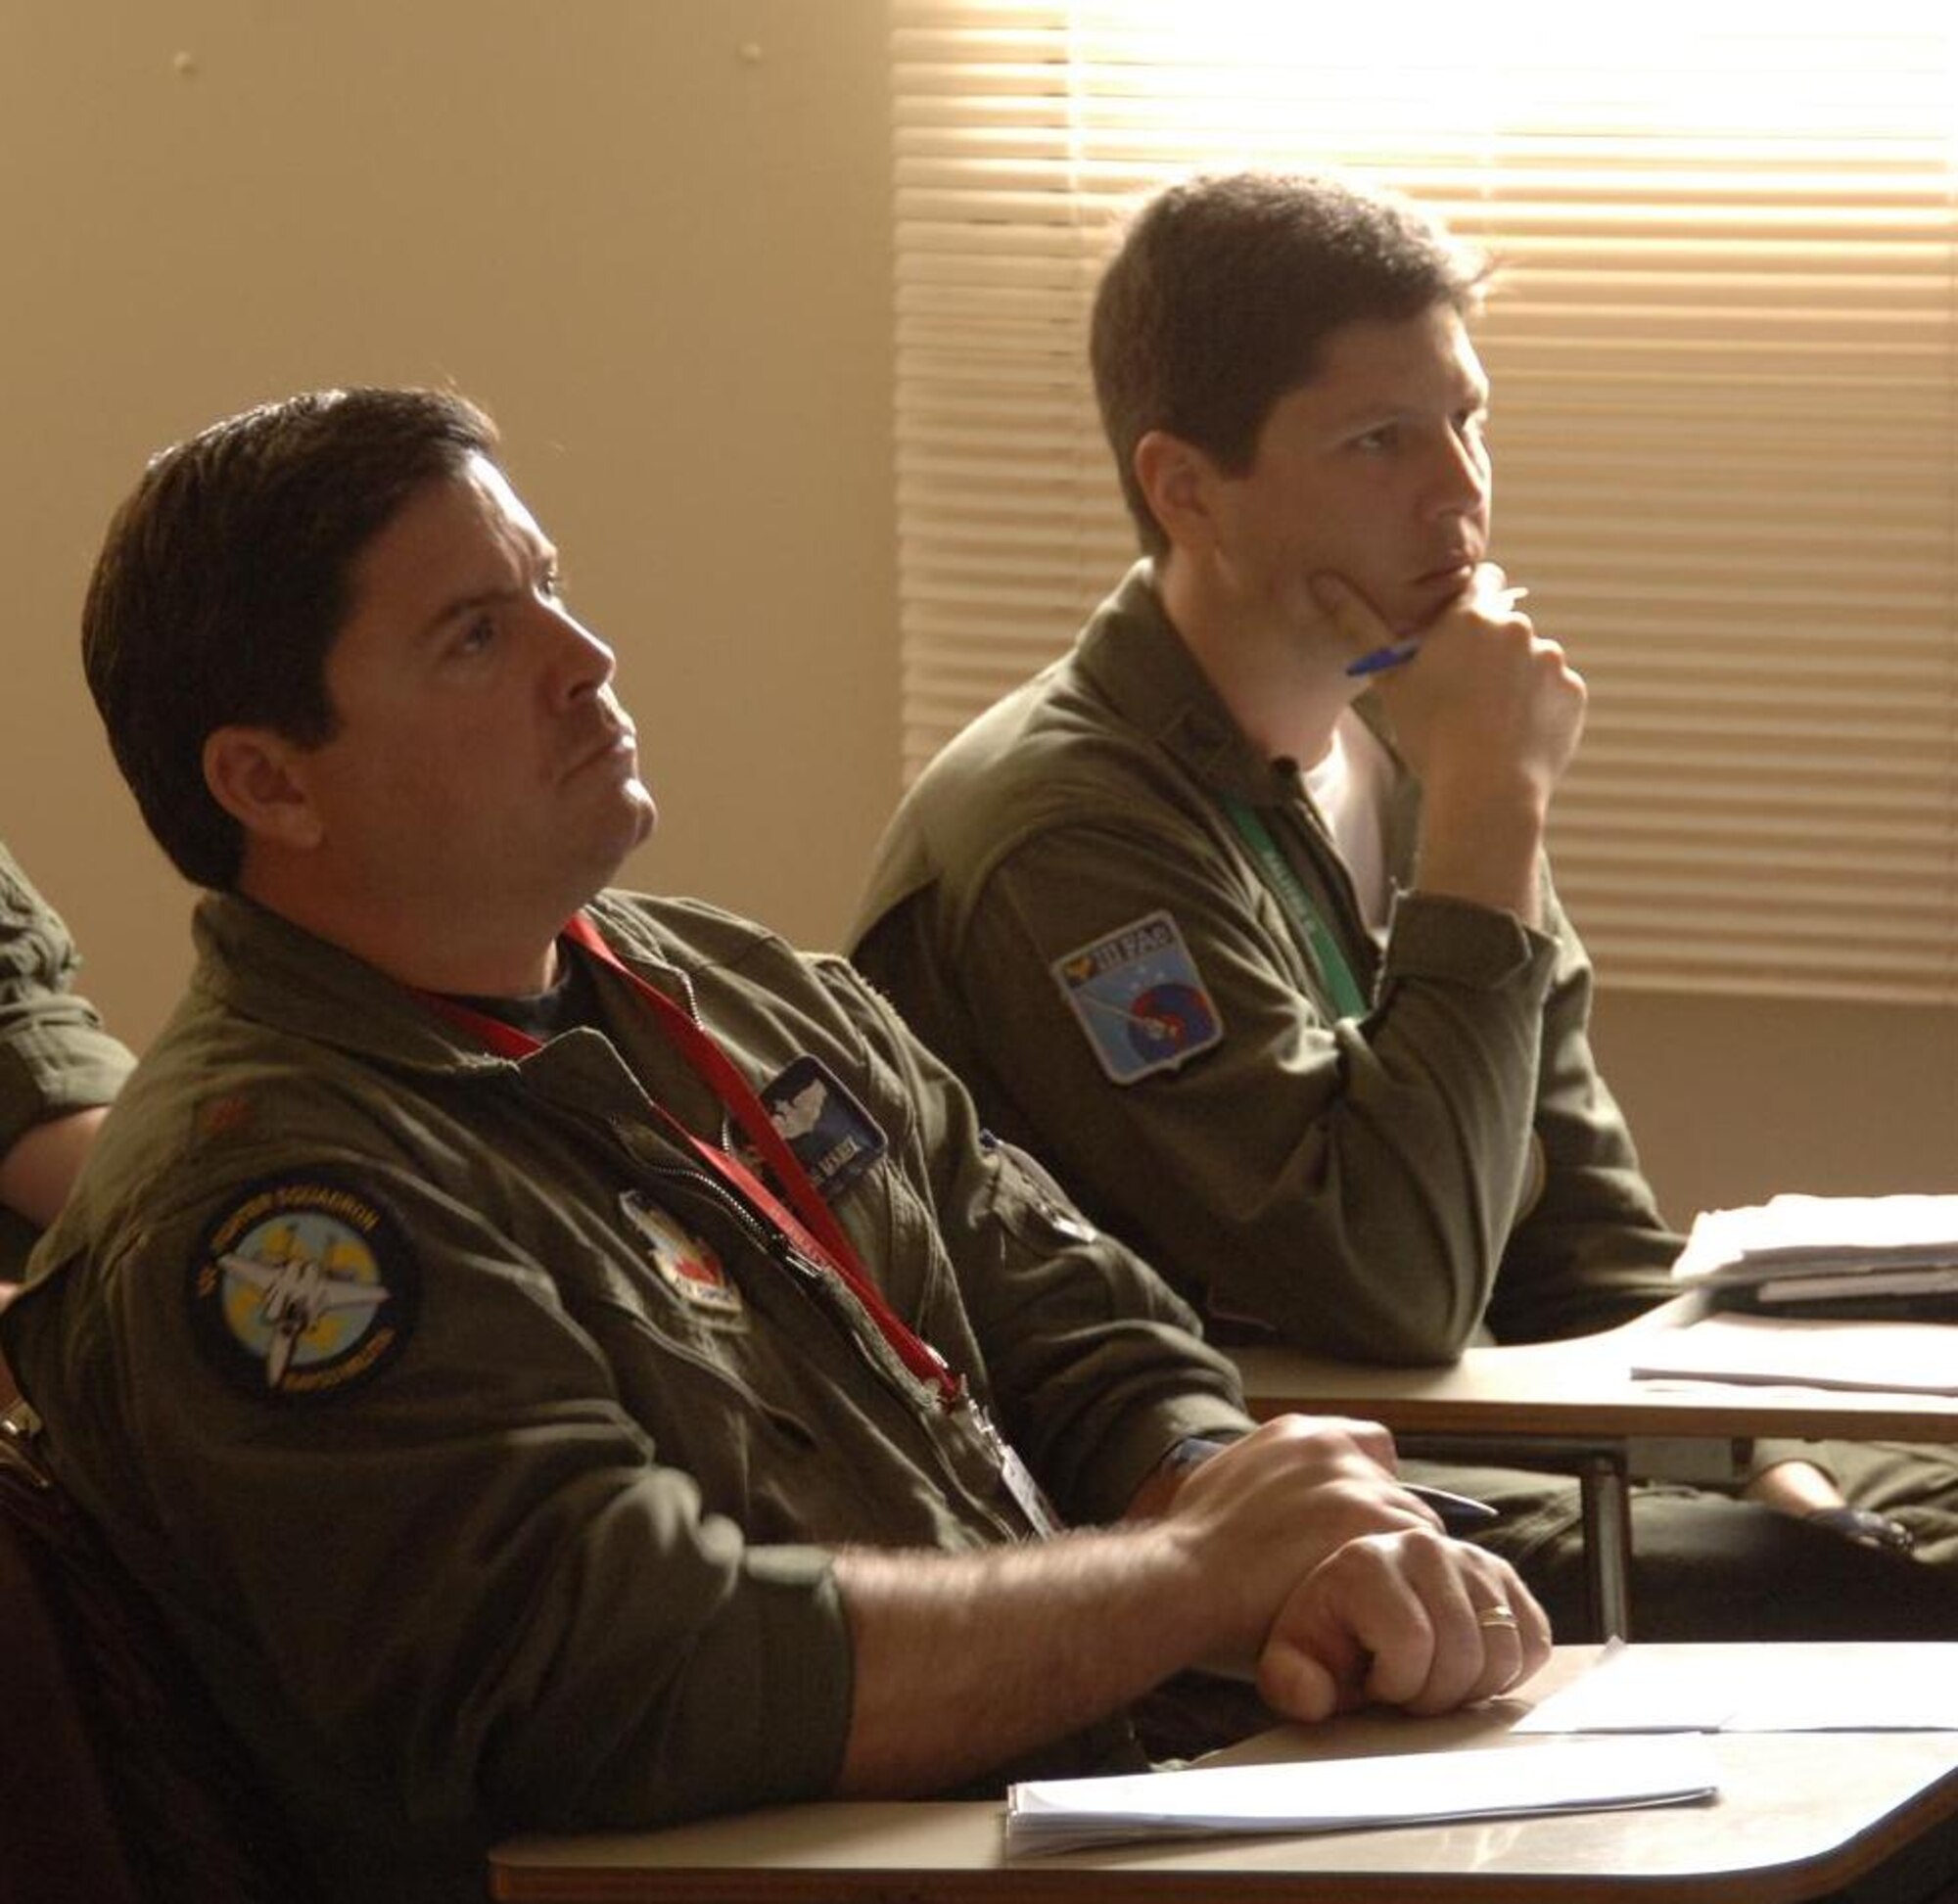 ANTOFAGASTA, Chile – Maj. John Manix, an F-15
pilot with the 159th Fighter Wing, and Capt. Daniel Manso, an A-1
pilot for the Brazilian Air Force, attend a briefing before flying in
a dissimilar aircraft formation during Exercise SALITRE II hosted by
Chile. The United State’s F-15, Brazil’s A-1, Chile’s F-16,
Argentina’s A-4 and France’s Mirage flew the formation Oct. 23. (U.S.
Air Force photo by Tech. Sgt. Eric Petosky))